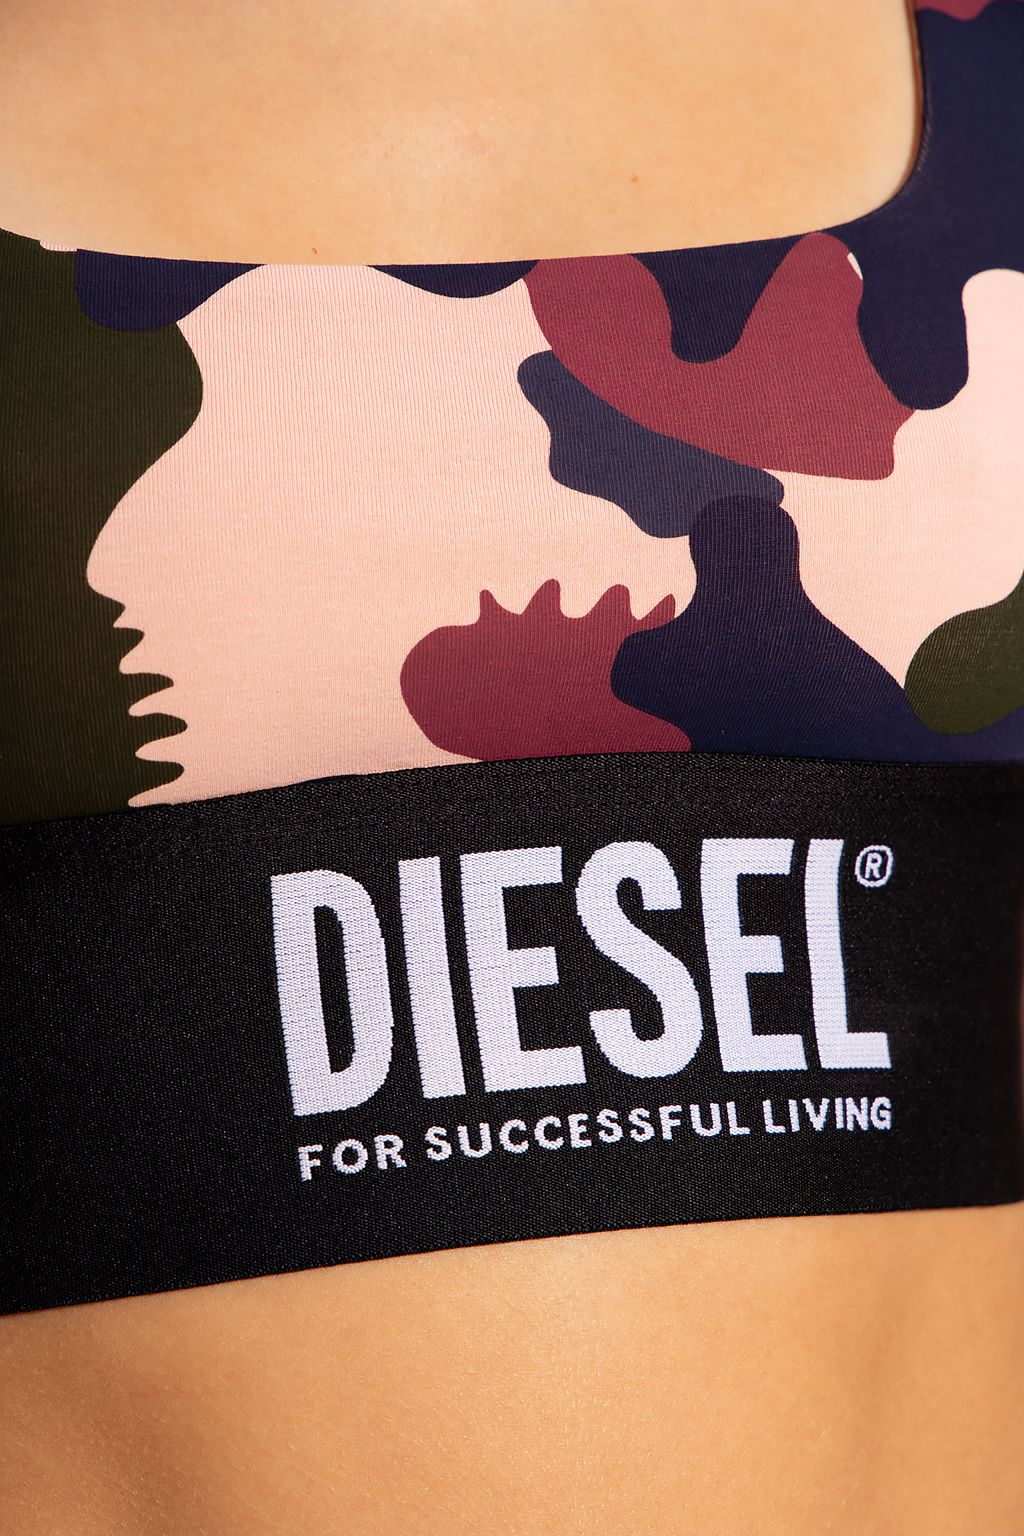 Diesel FASHION IS ALL ABOUT FUN